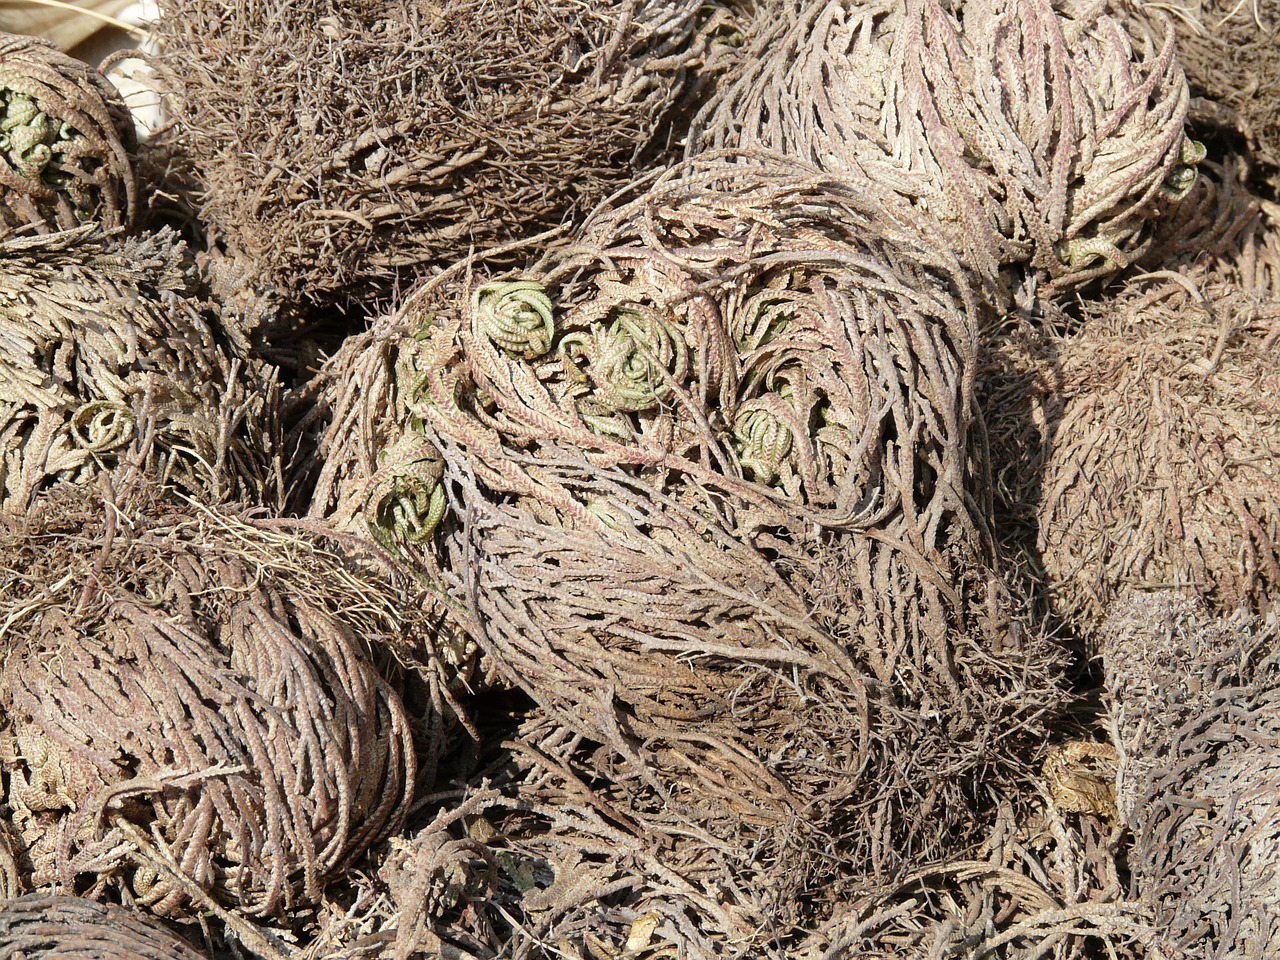 Rose Of Jericho: Care And Growing Guide